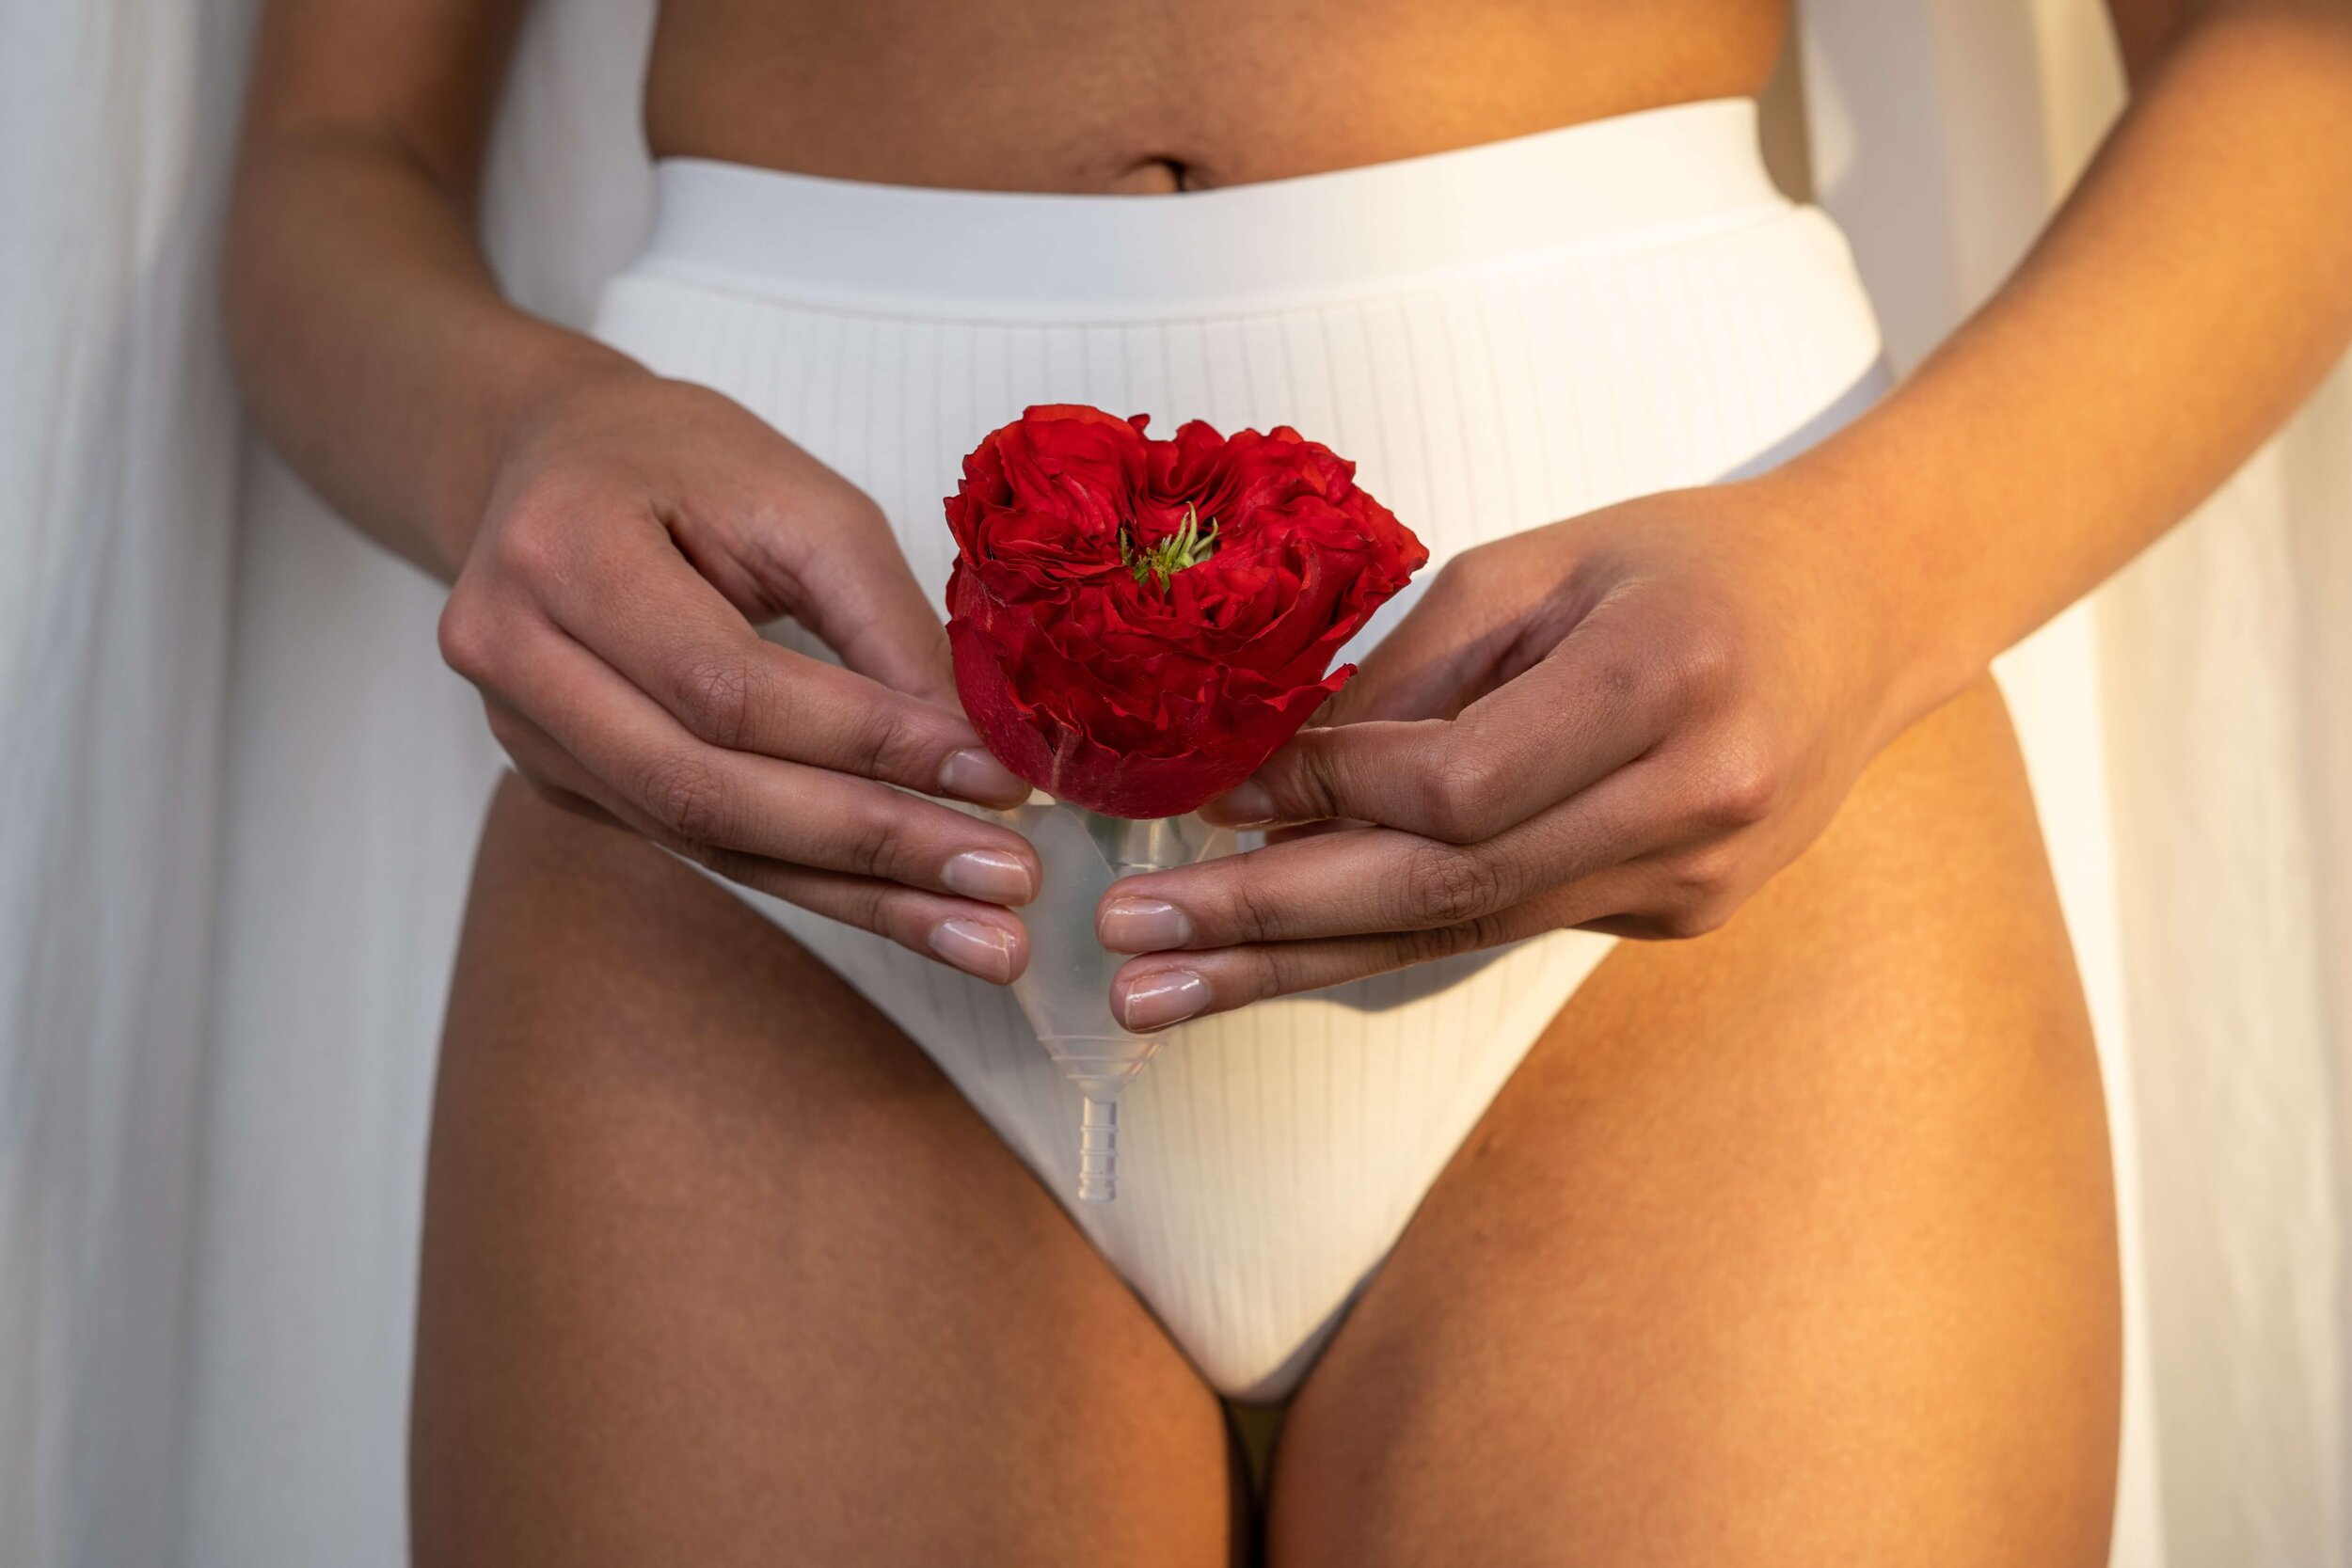 A No-BS Guide To Treating And Preventing UTIs — The Candidly